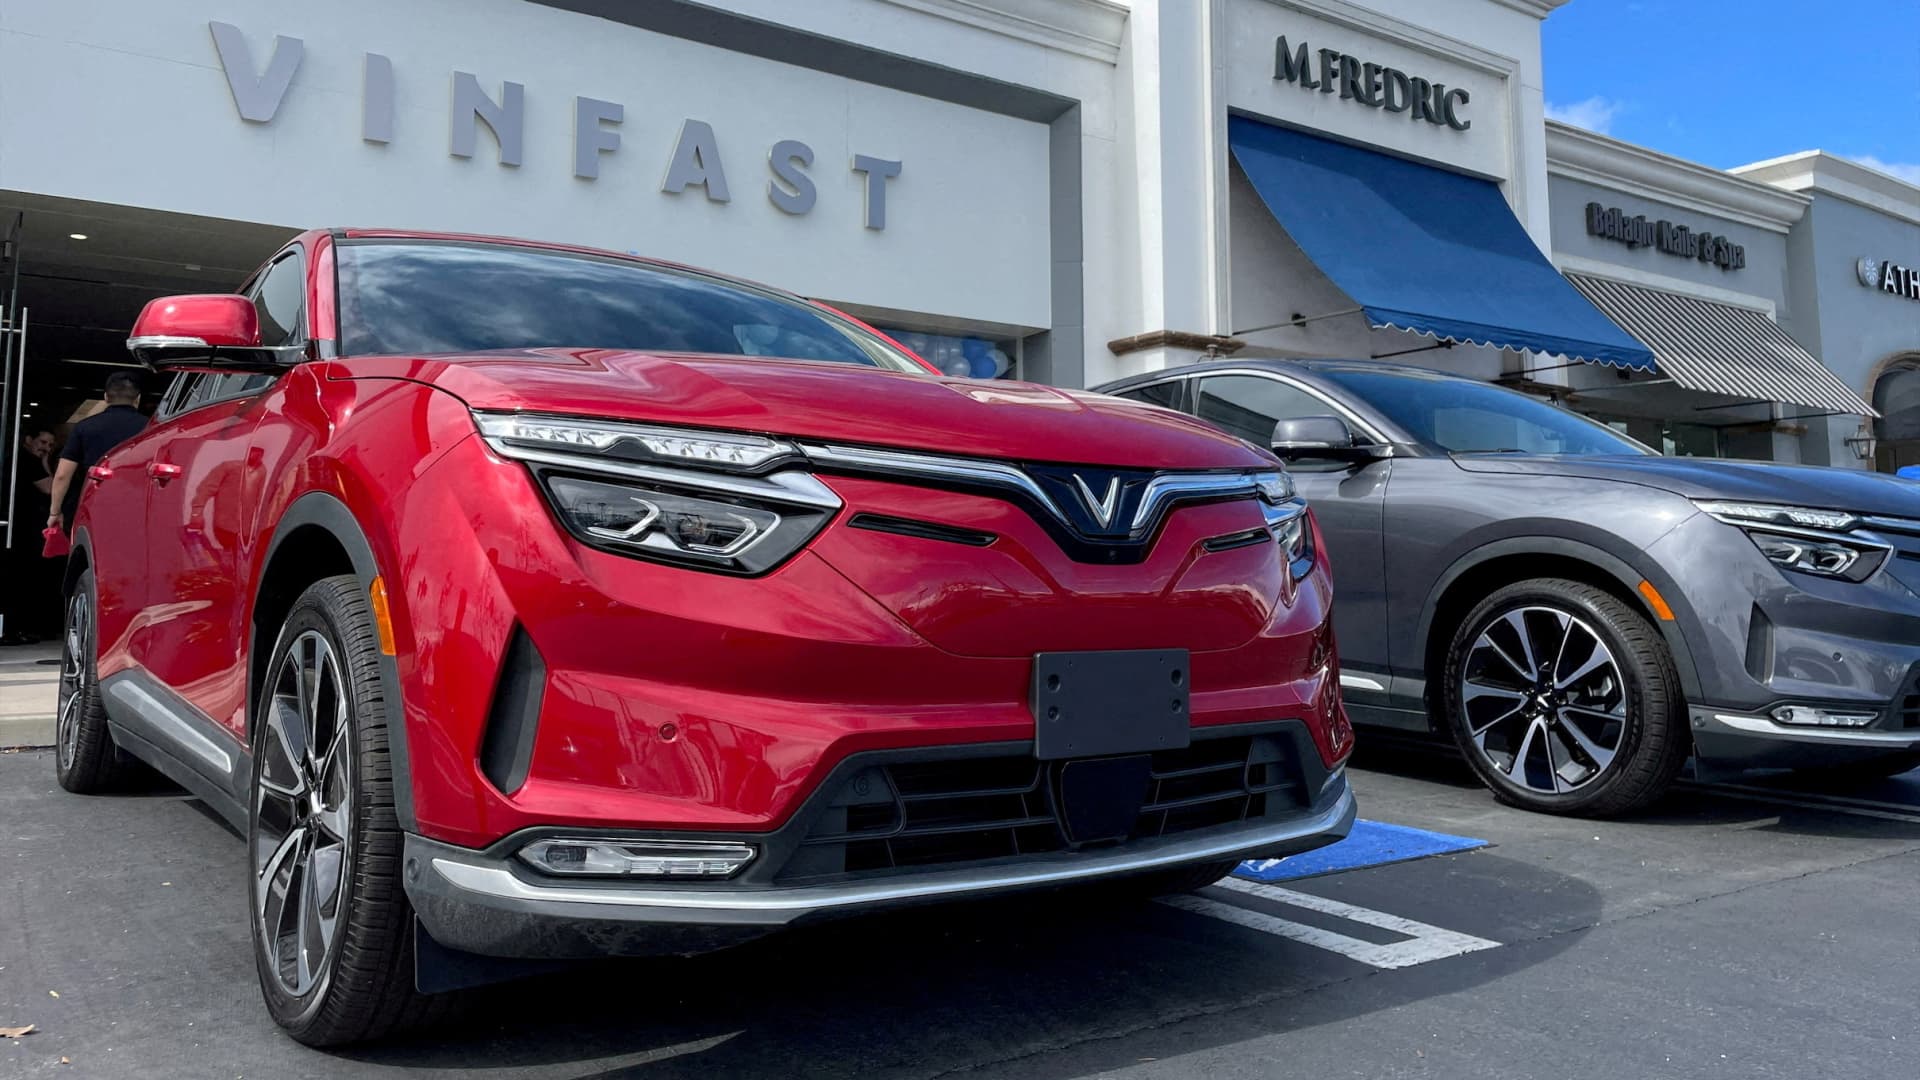 VinFast aims to sell up to 50,000 EVs in 2023 — but it has only hit 23% of its target so far